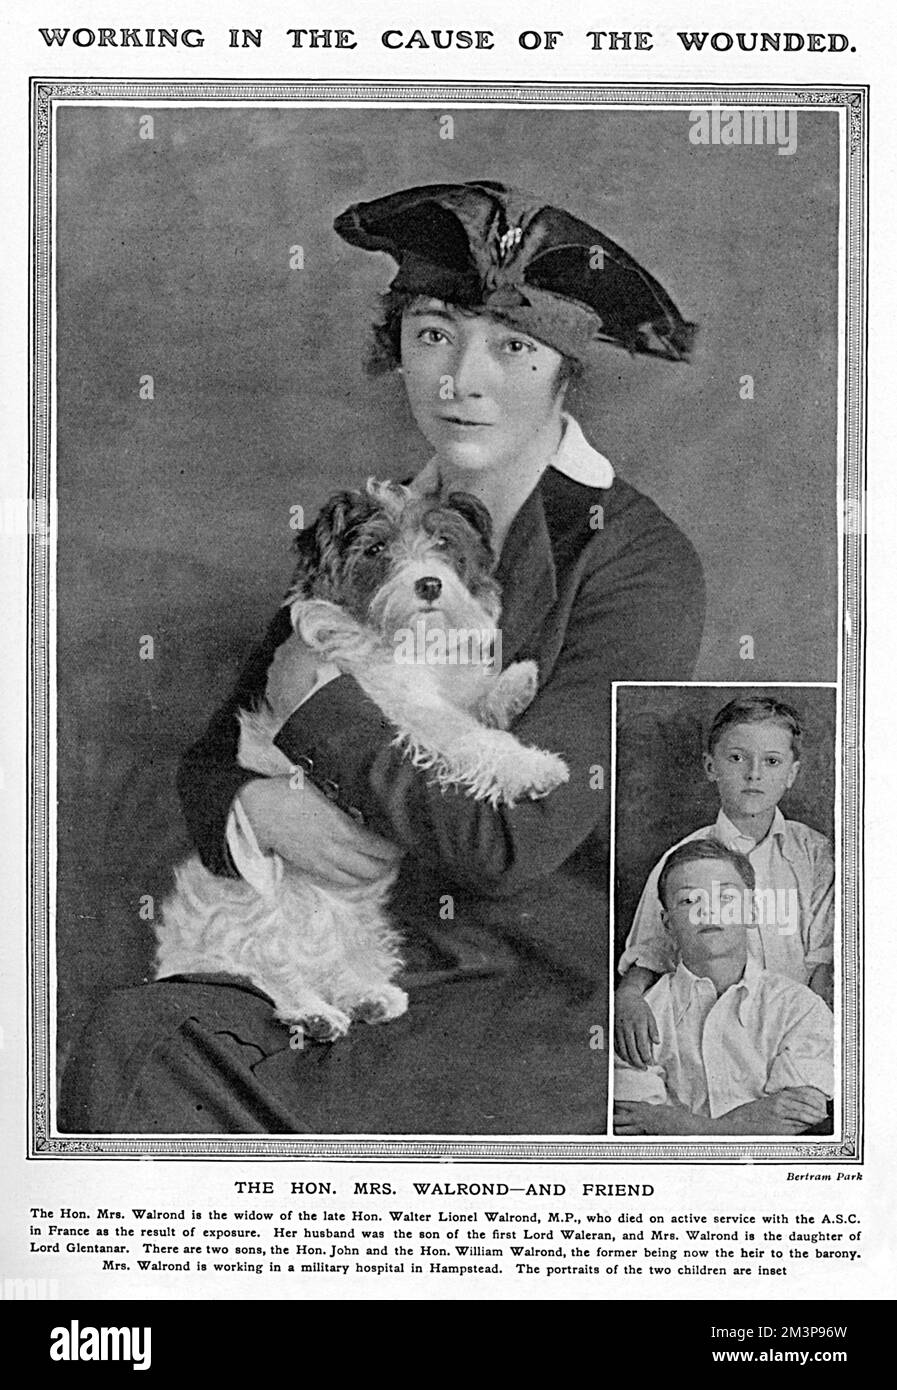 Portrait of the Hon. Mrs Walrond, daughter of Lord Glentanar and widow of the late Hon. Walter Lionel Walrond, M.P. who died on active service with the Army Service Corps in France as a result of exposure. She was working at a military hospital in Hampstead during the war.  Inset photograph shows her two sons, John and William Walrond.     Date: 1917 Stock Photo